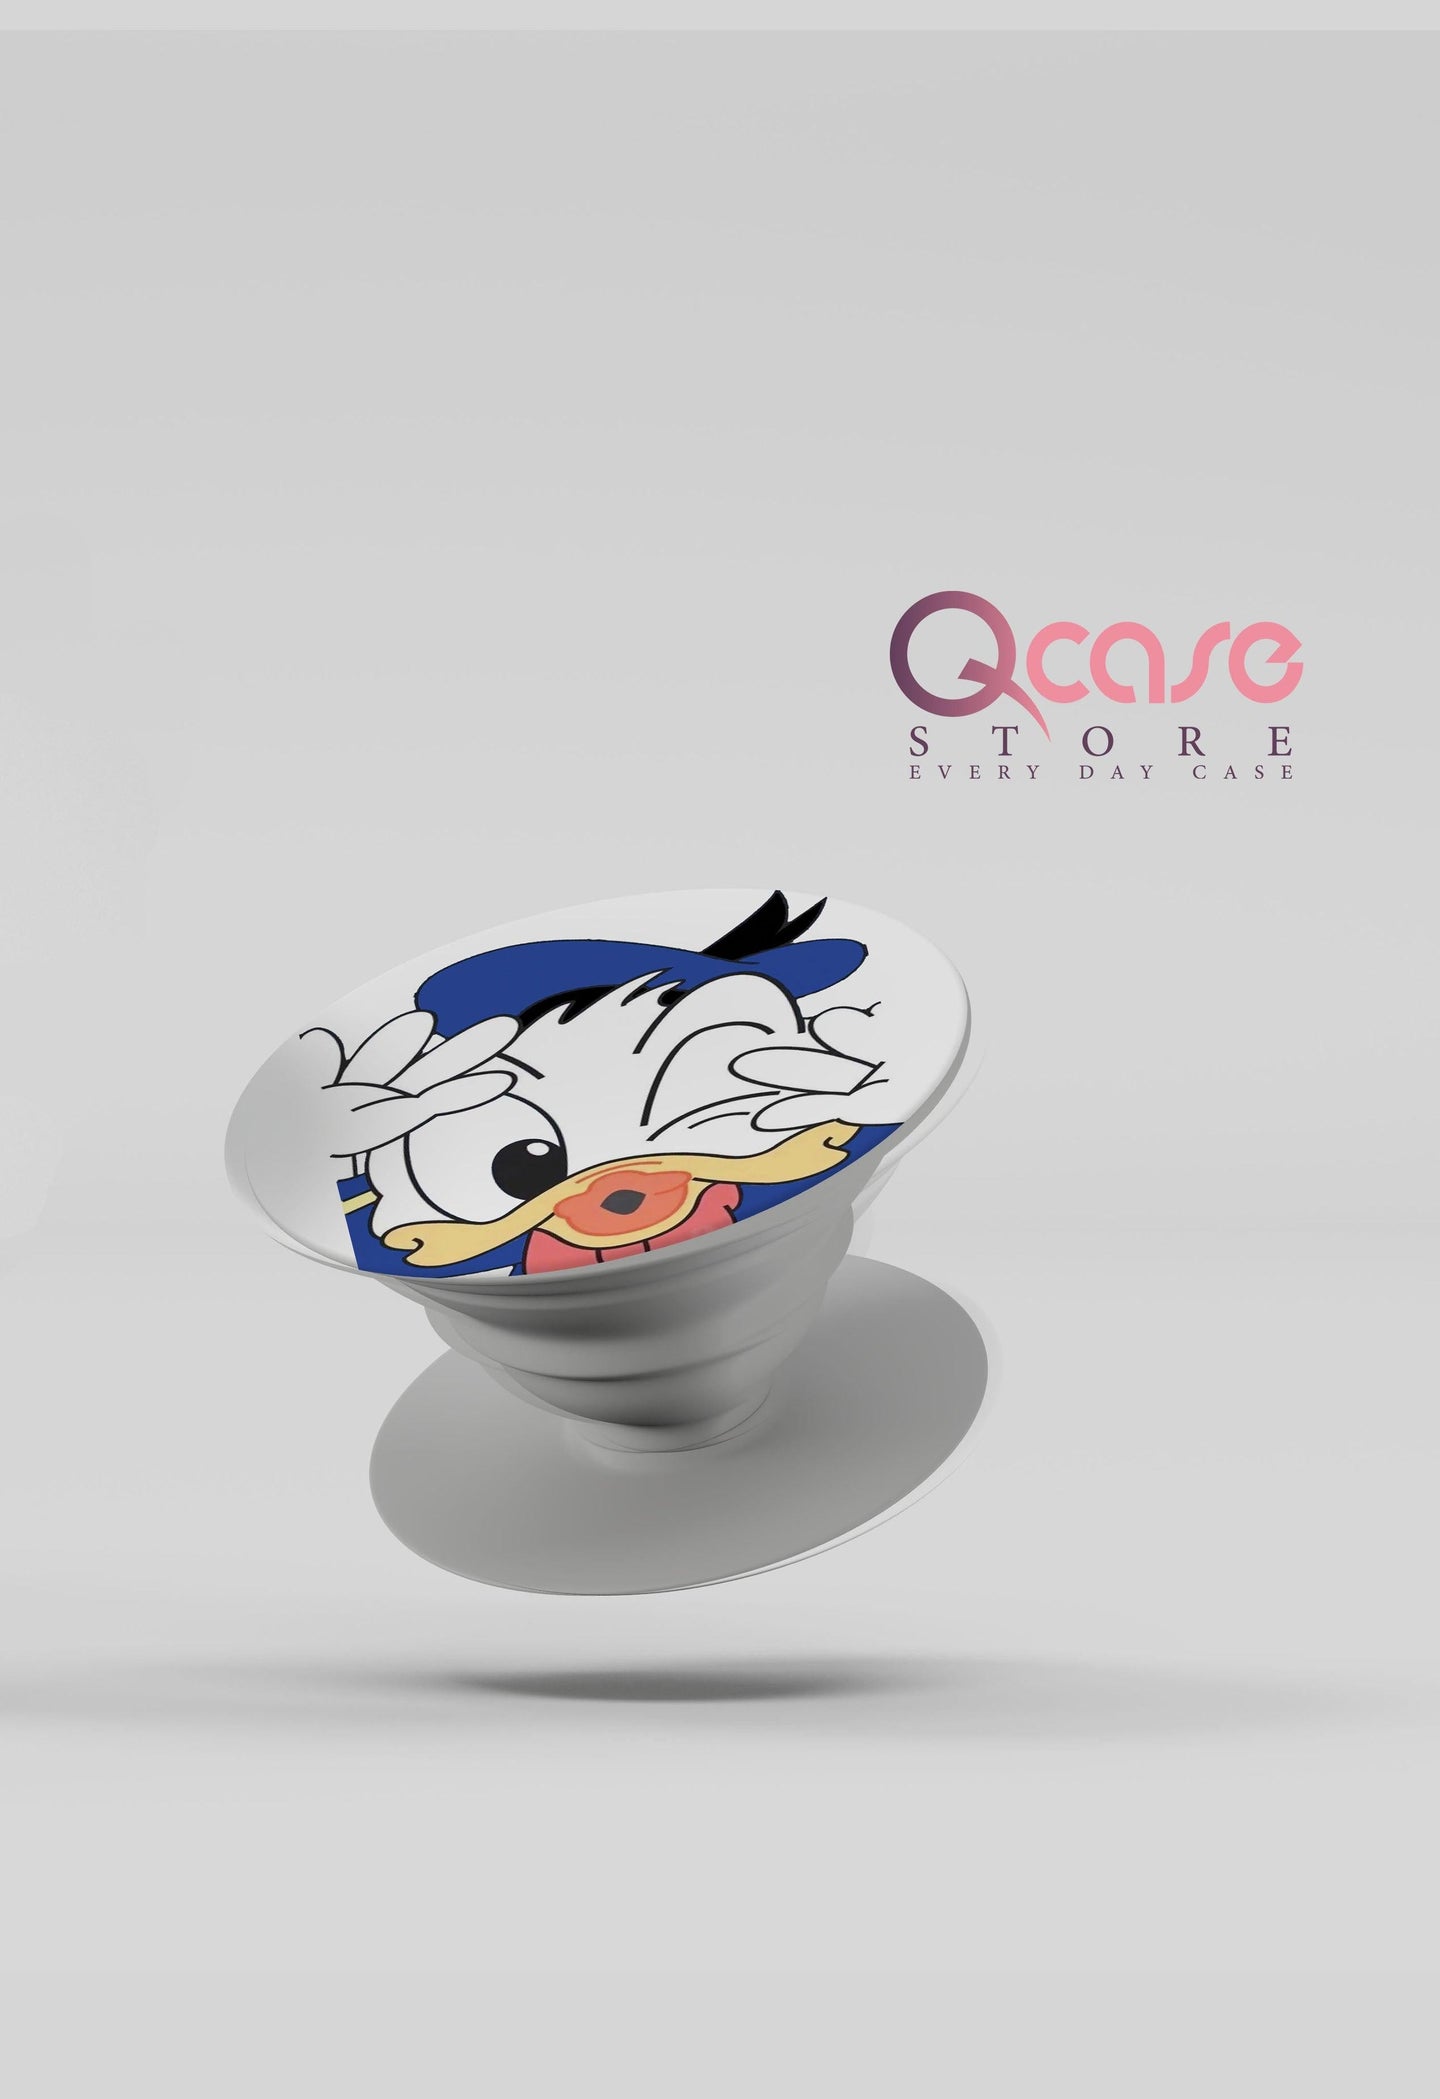 donald duck popsocket - Qcase Store | Everyday Case